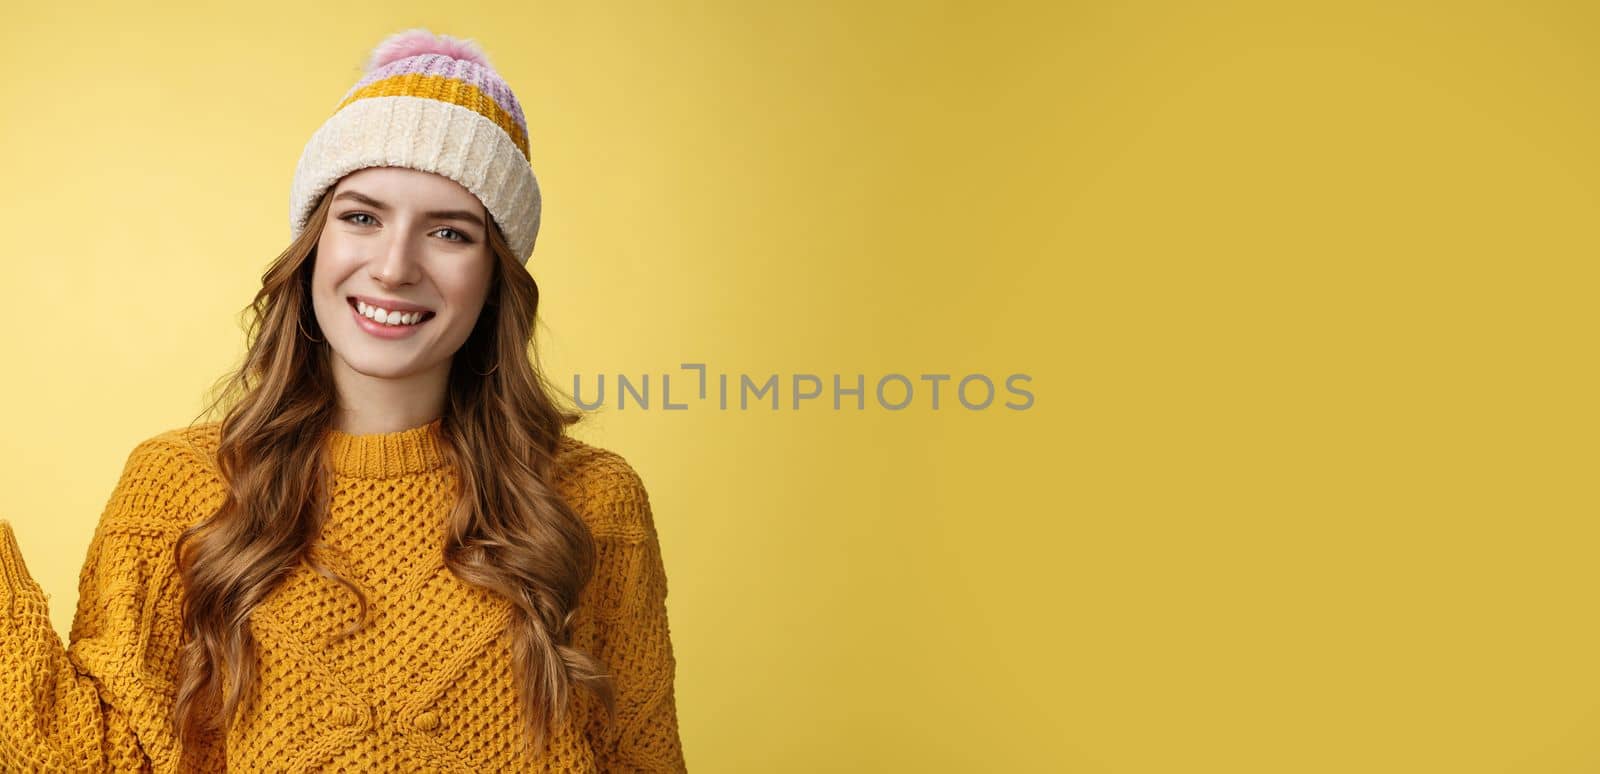 Friendly-looking confident pleasant attactive young european woman wearing winter hat, sweater extend arm show product welcoming inviting guests come in smiling happily, promoting copy space.